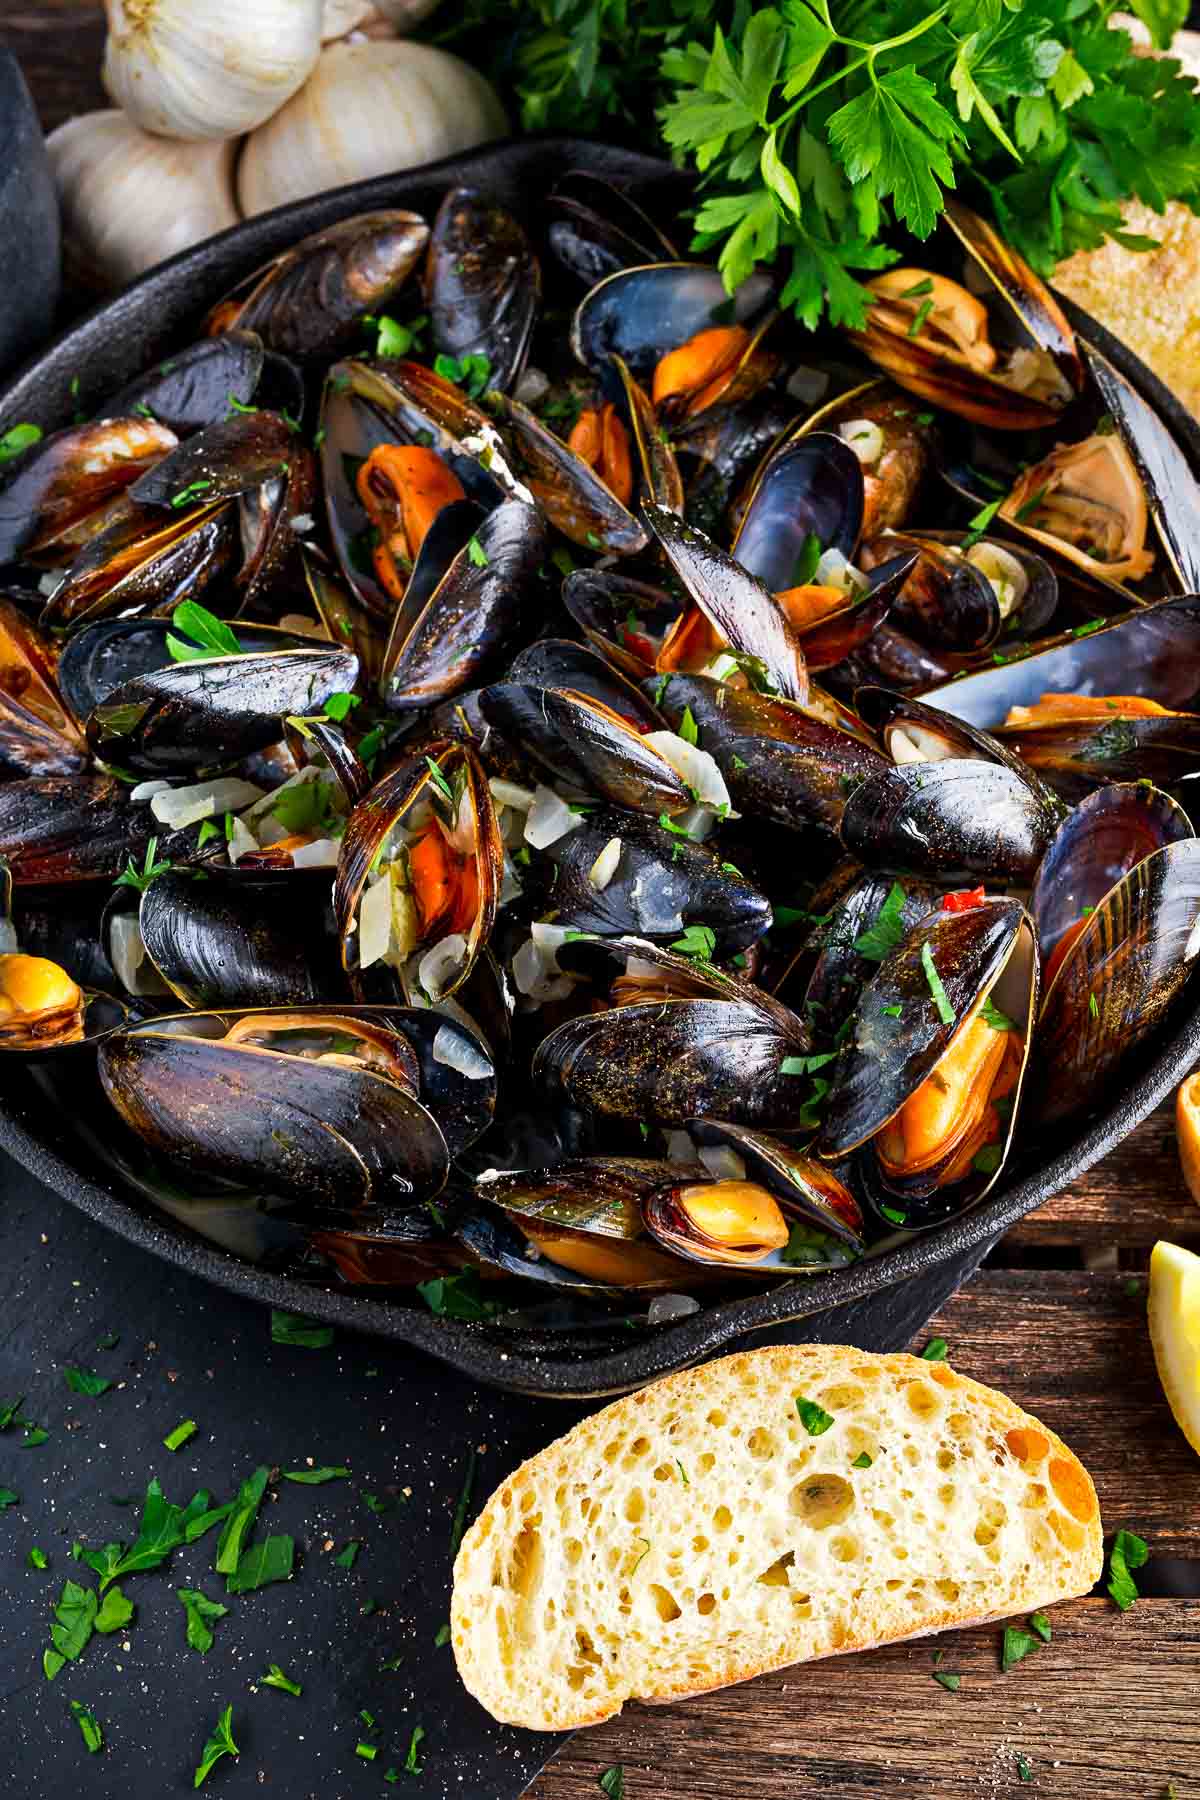 A pot filled with Thai curry steamed mussels garnished with red chili peppers and cilantro on a wooden board with sliced bread, garlic, and green herbs on the side.